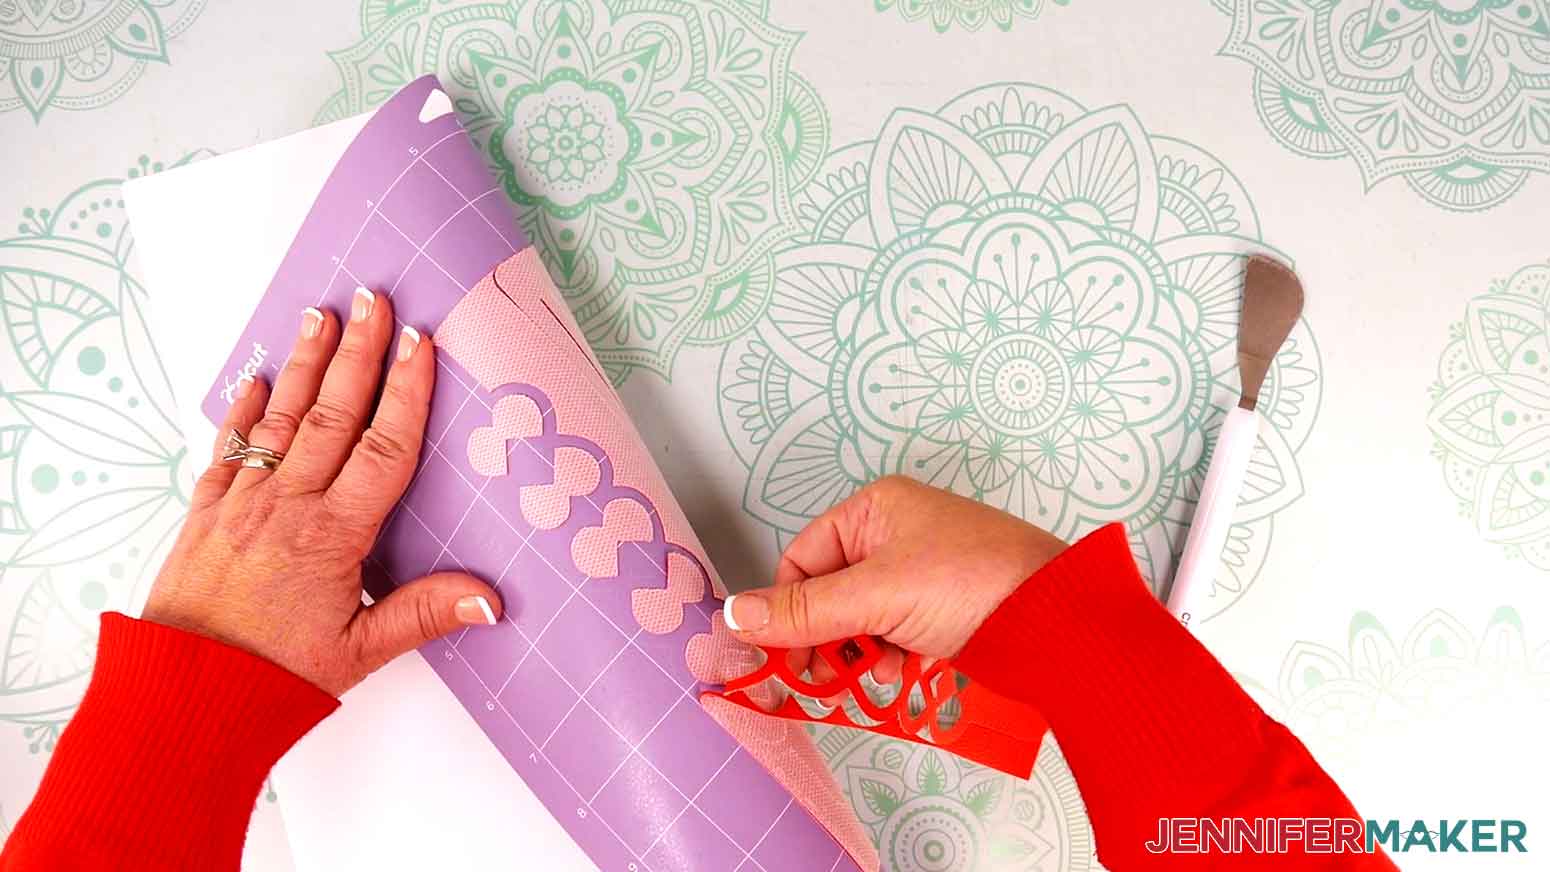 Flip the StrongGrip mat over and gently pull the faux leather bracelet off of the mat.